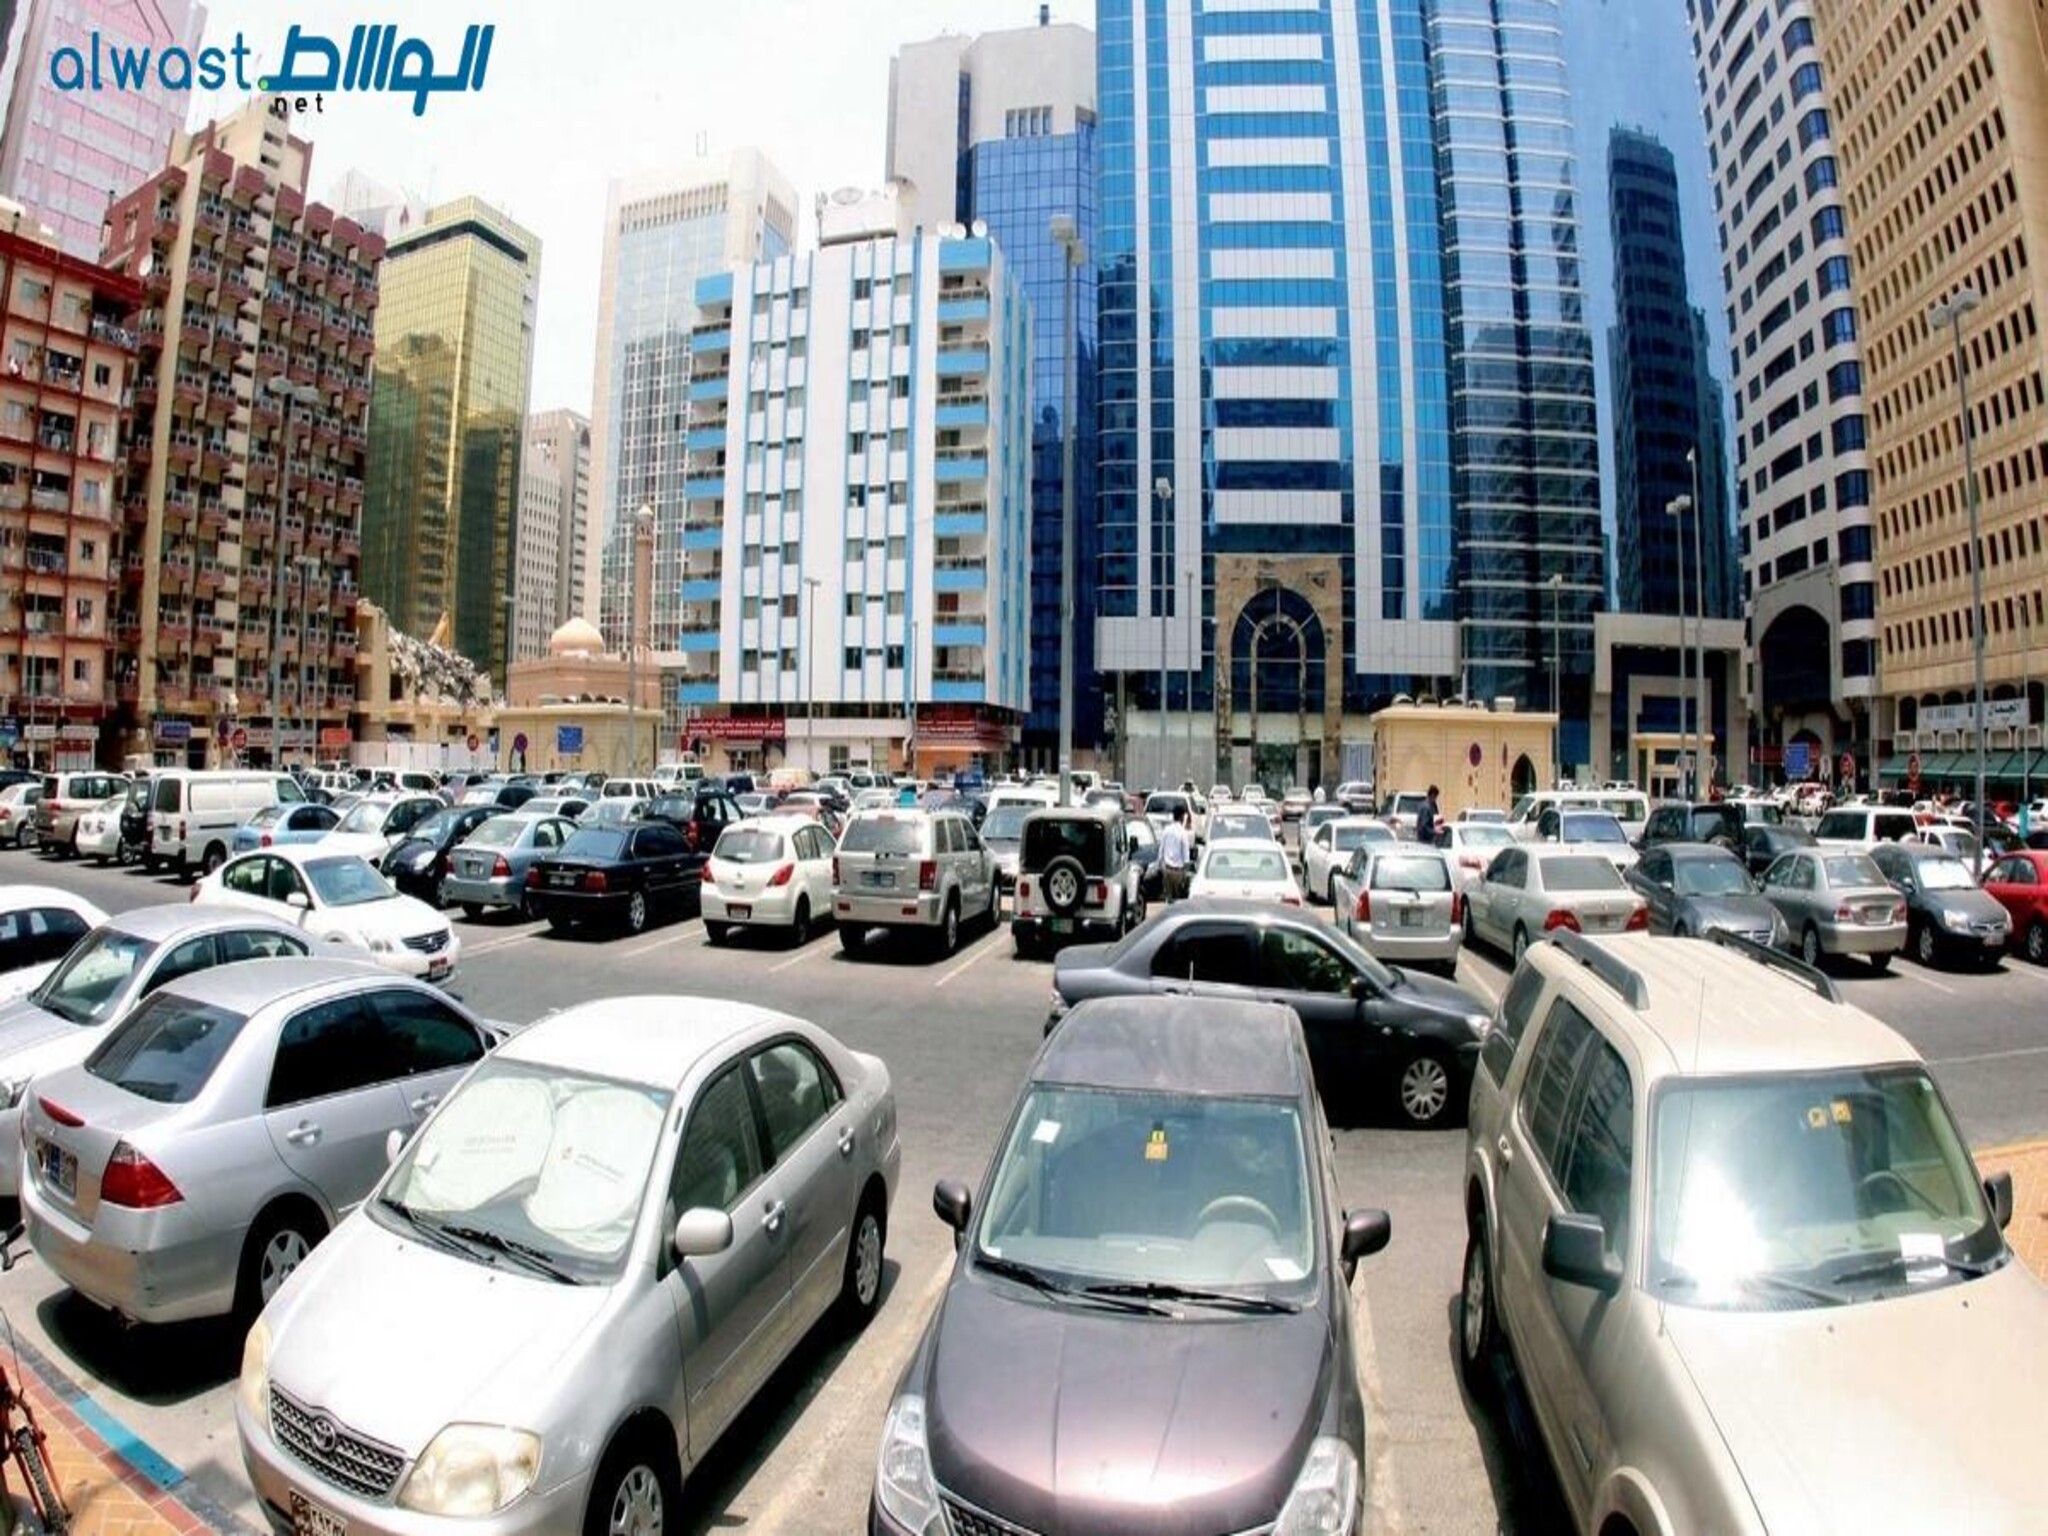 Sharjah government announces free parking for Eid Al Fitr holidays